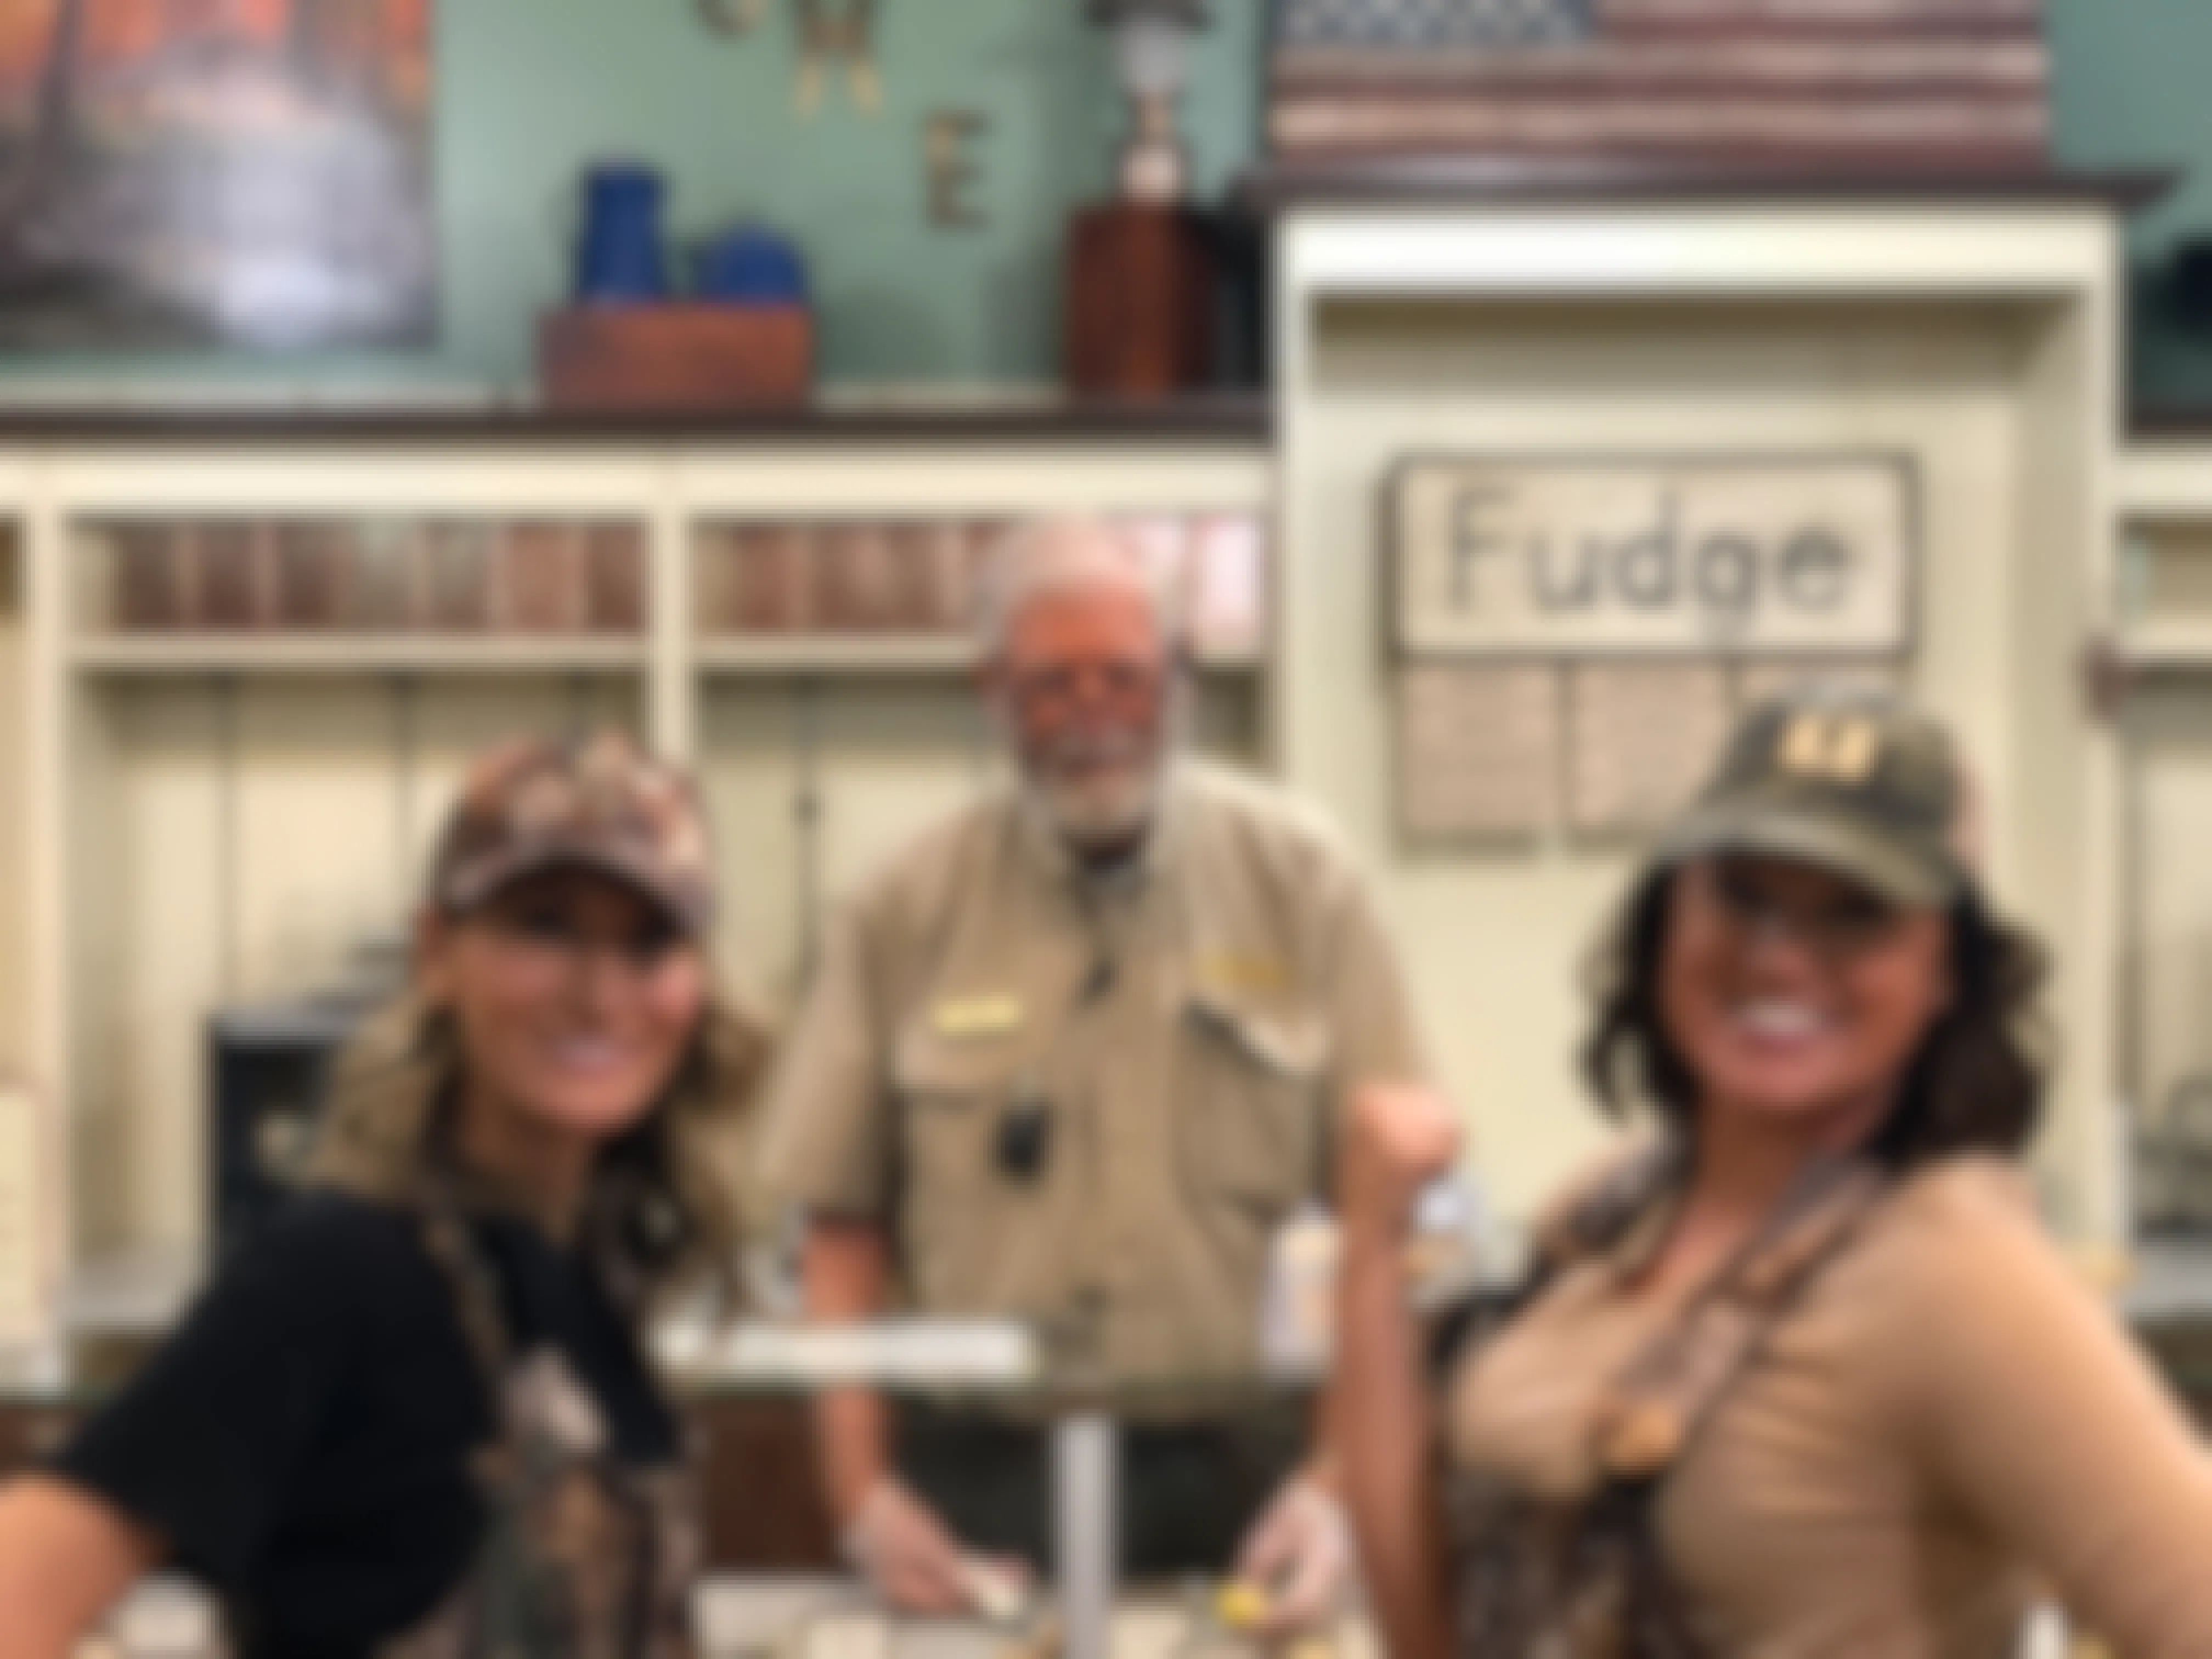 Two women posing with a Cabela's employee at the fudge bar inside Cabela's.